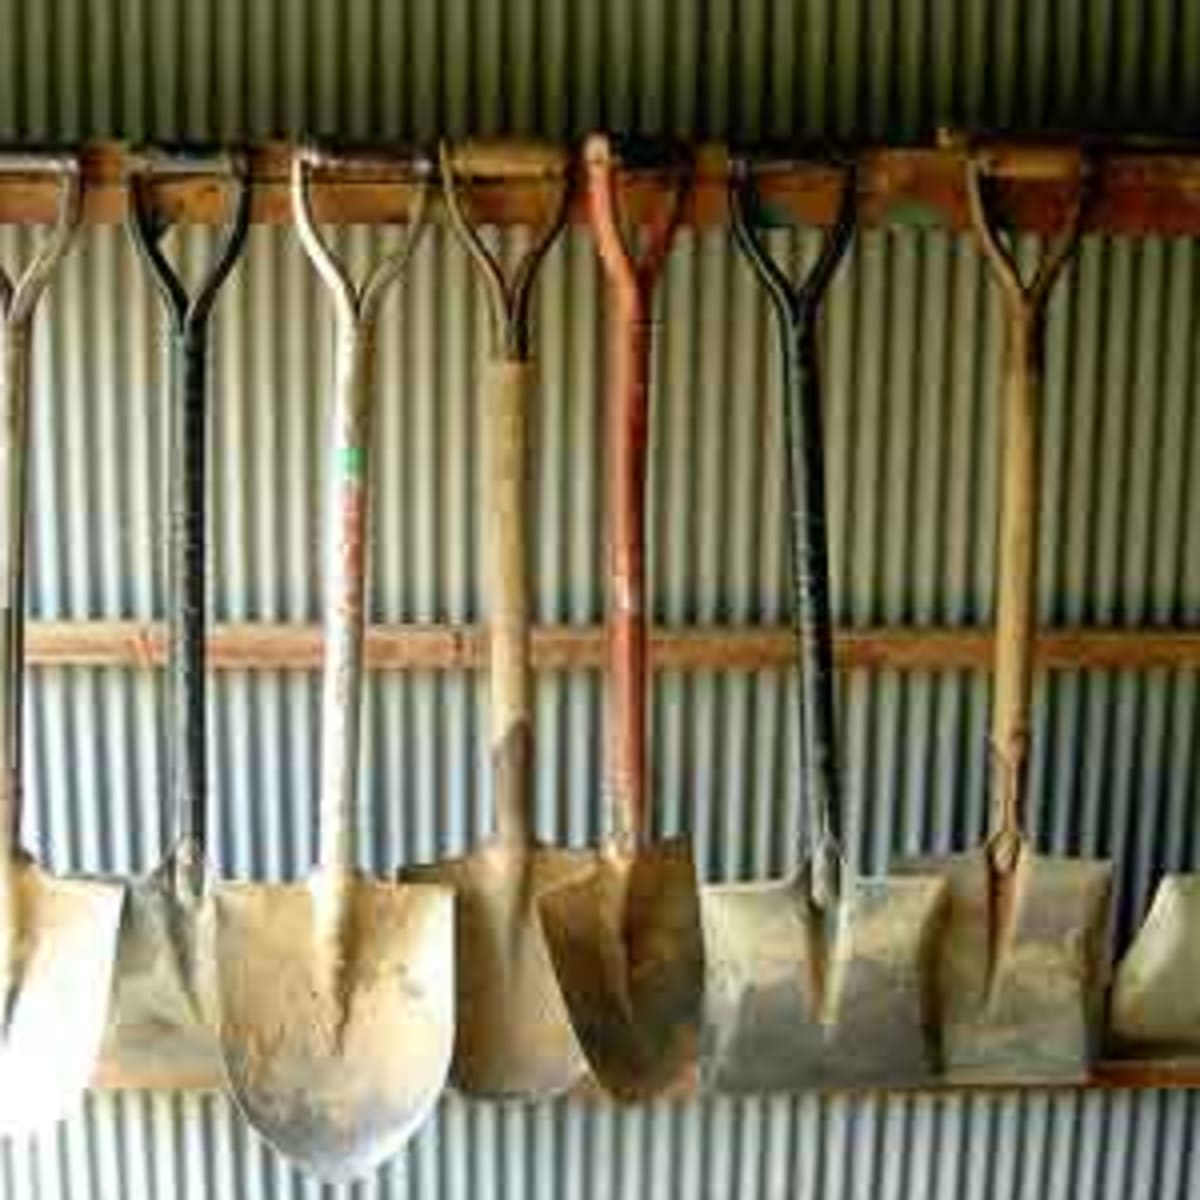 II. Why is it important to store garden tools properly?